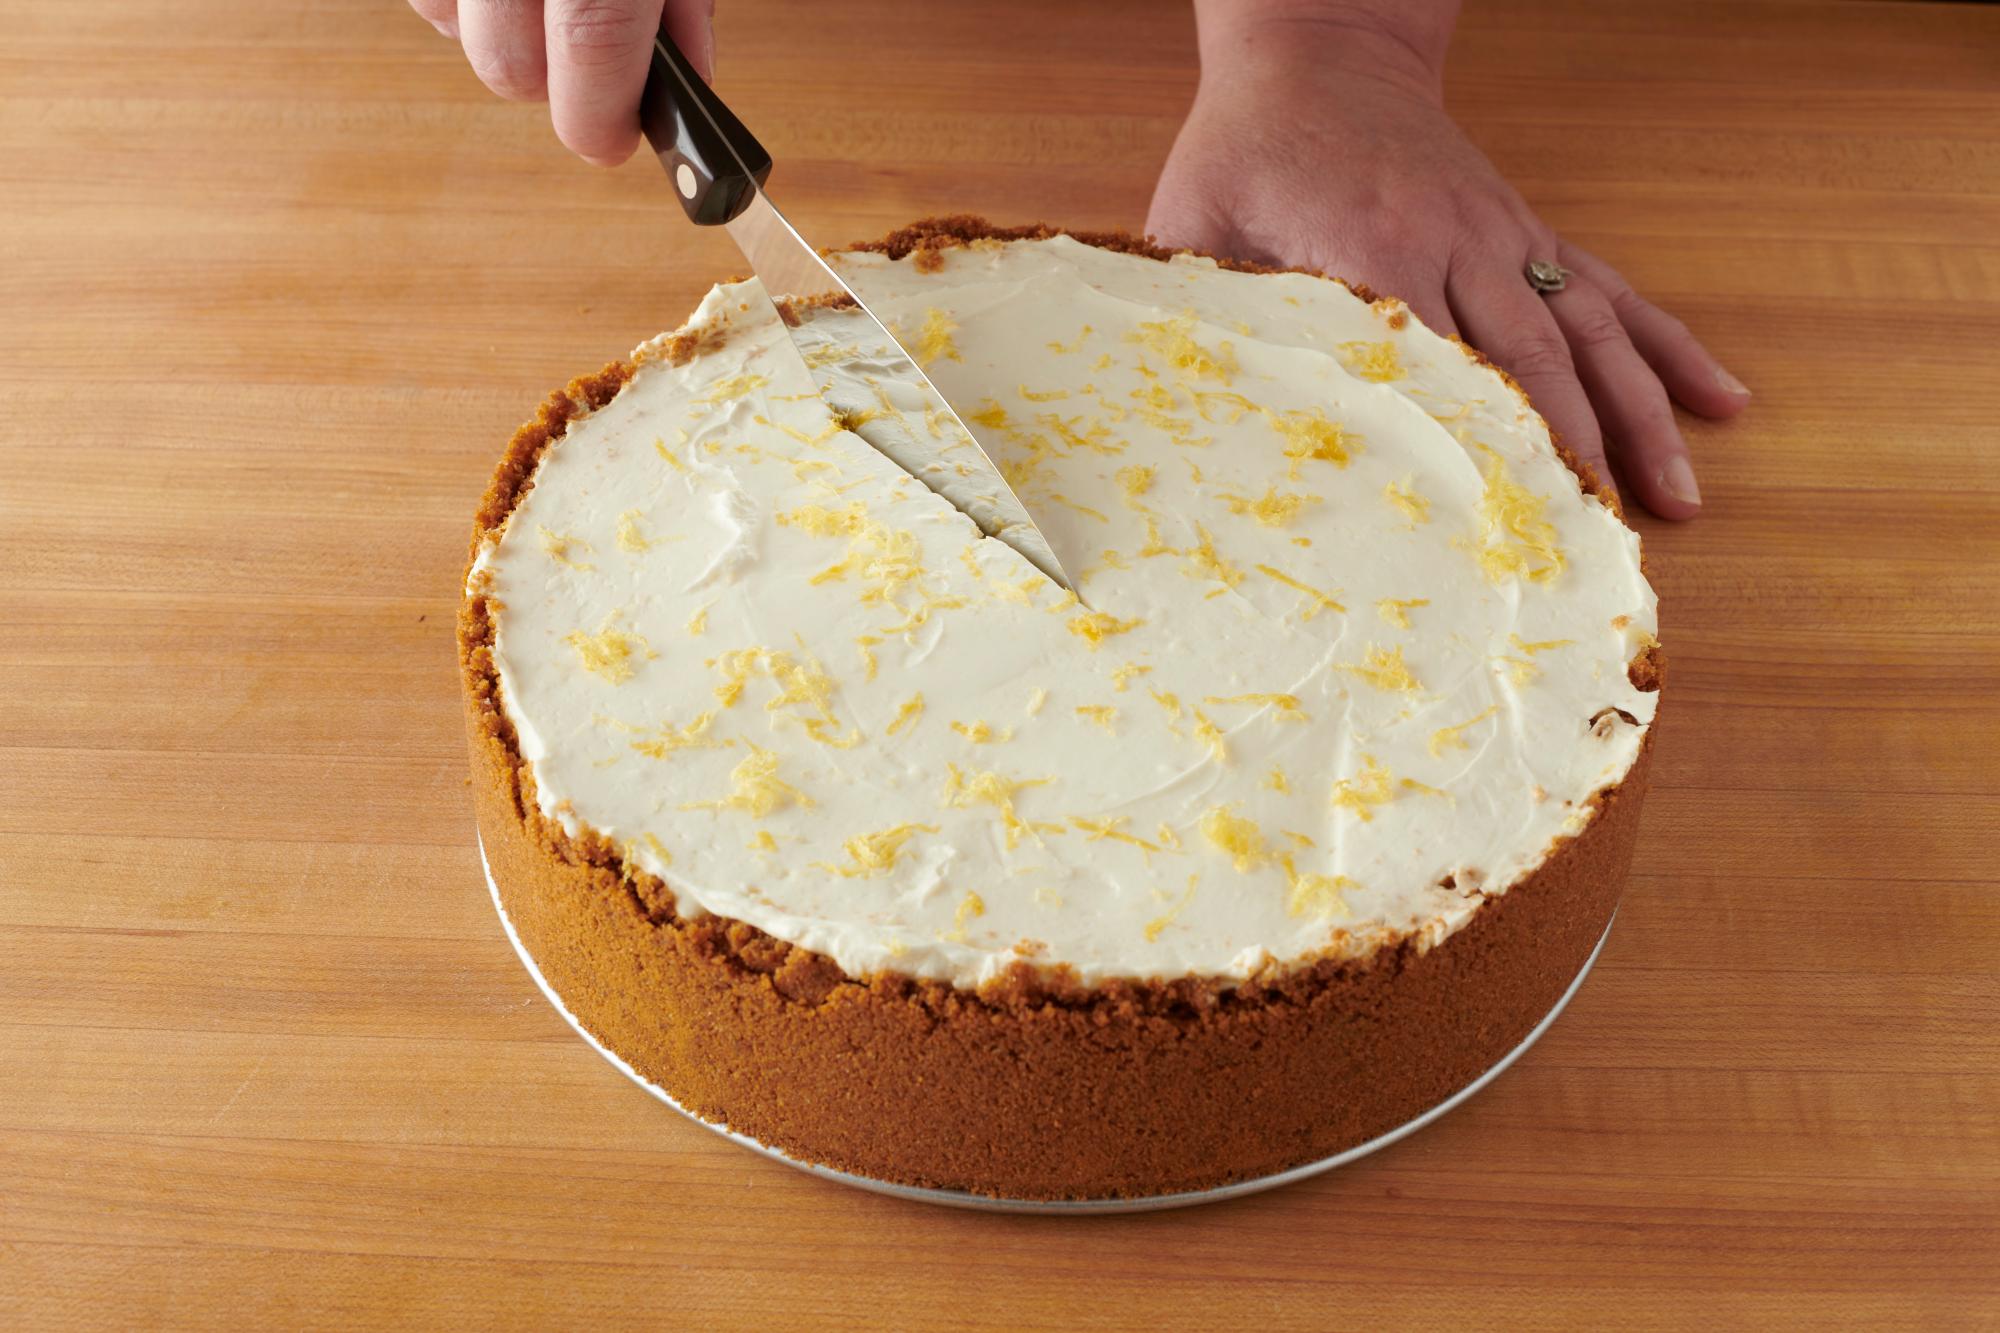 Slicing the cheesecake with a Spatula Spreader.